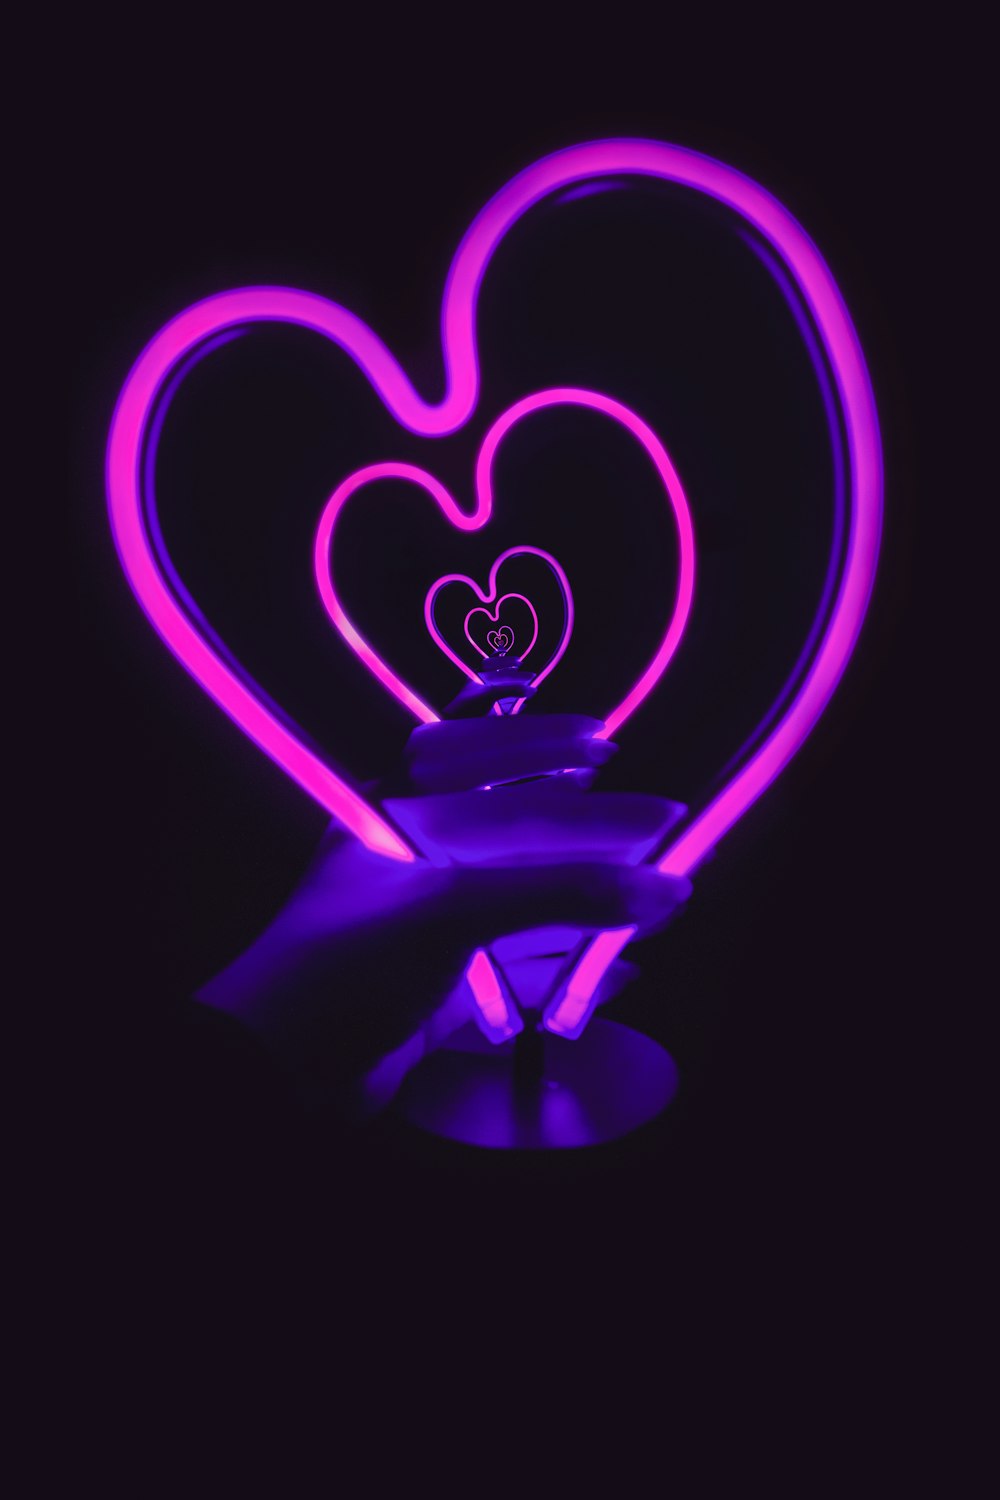 Turned on pink heart 3d lamp photo – Free Abstract Image on Unsplash